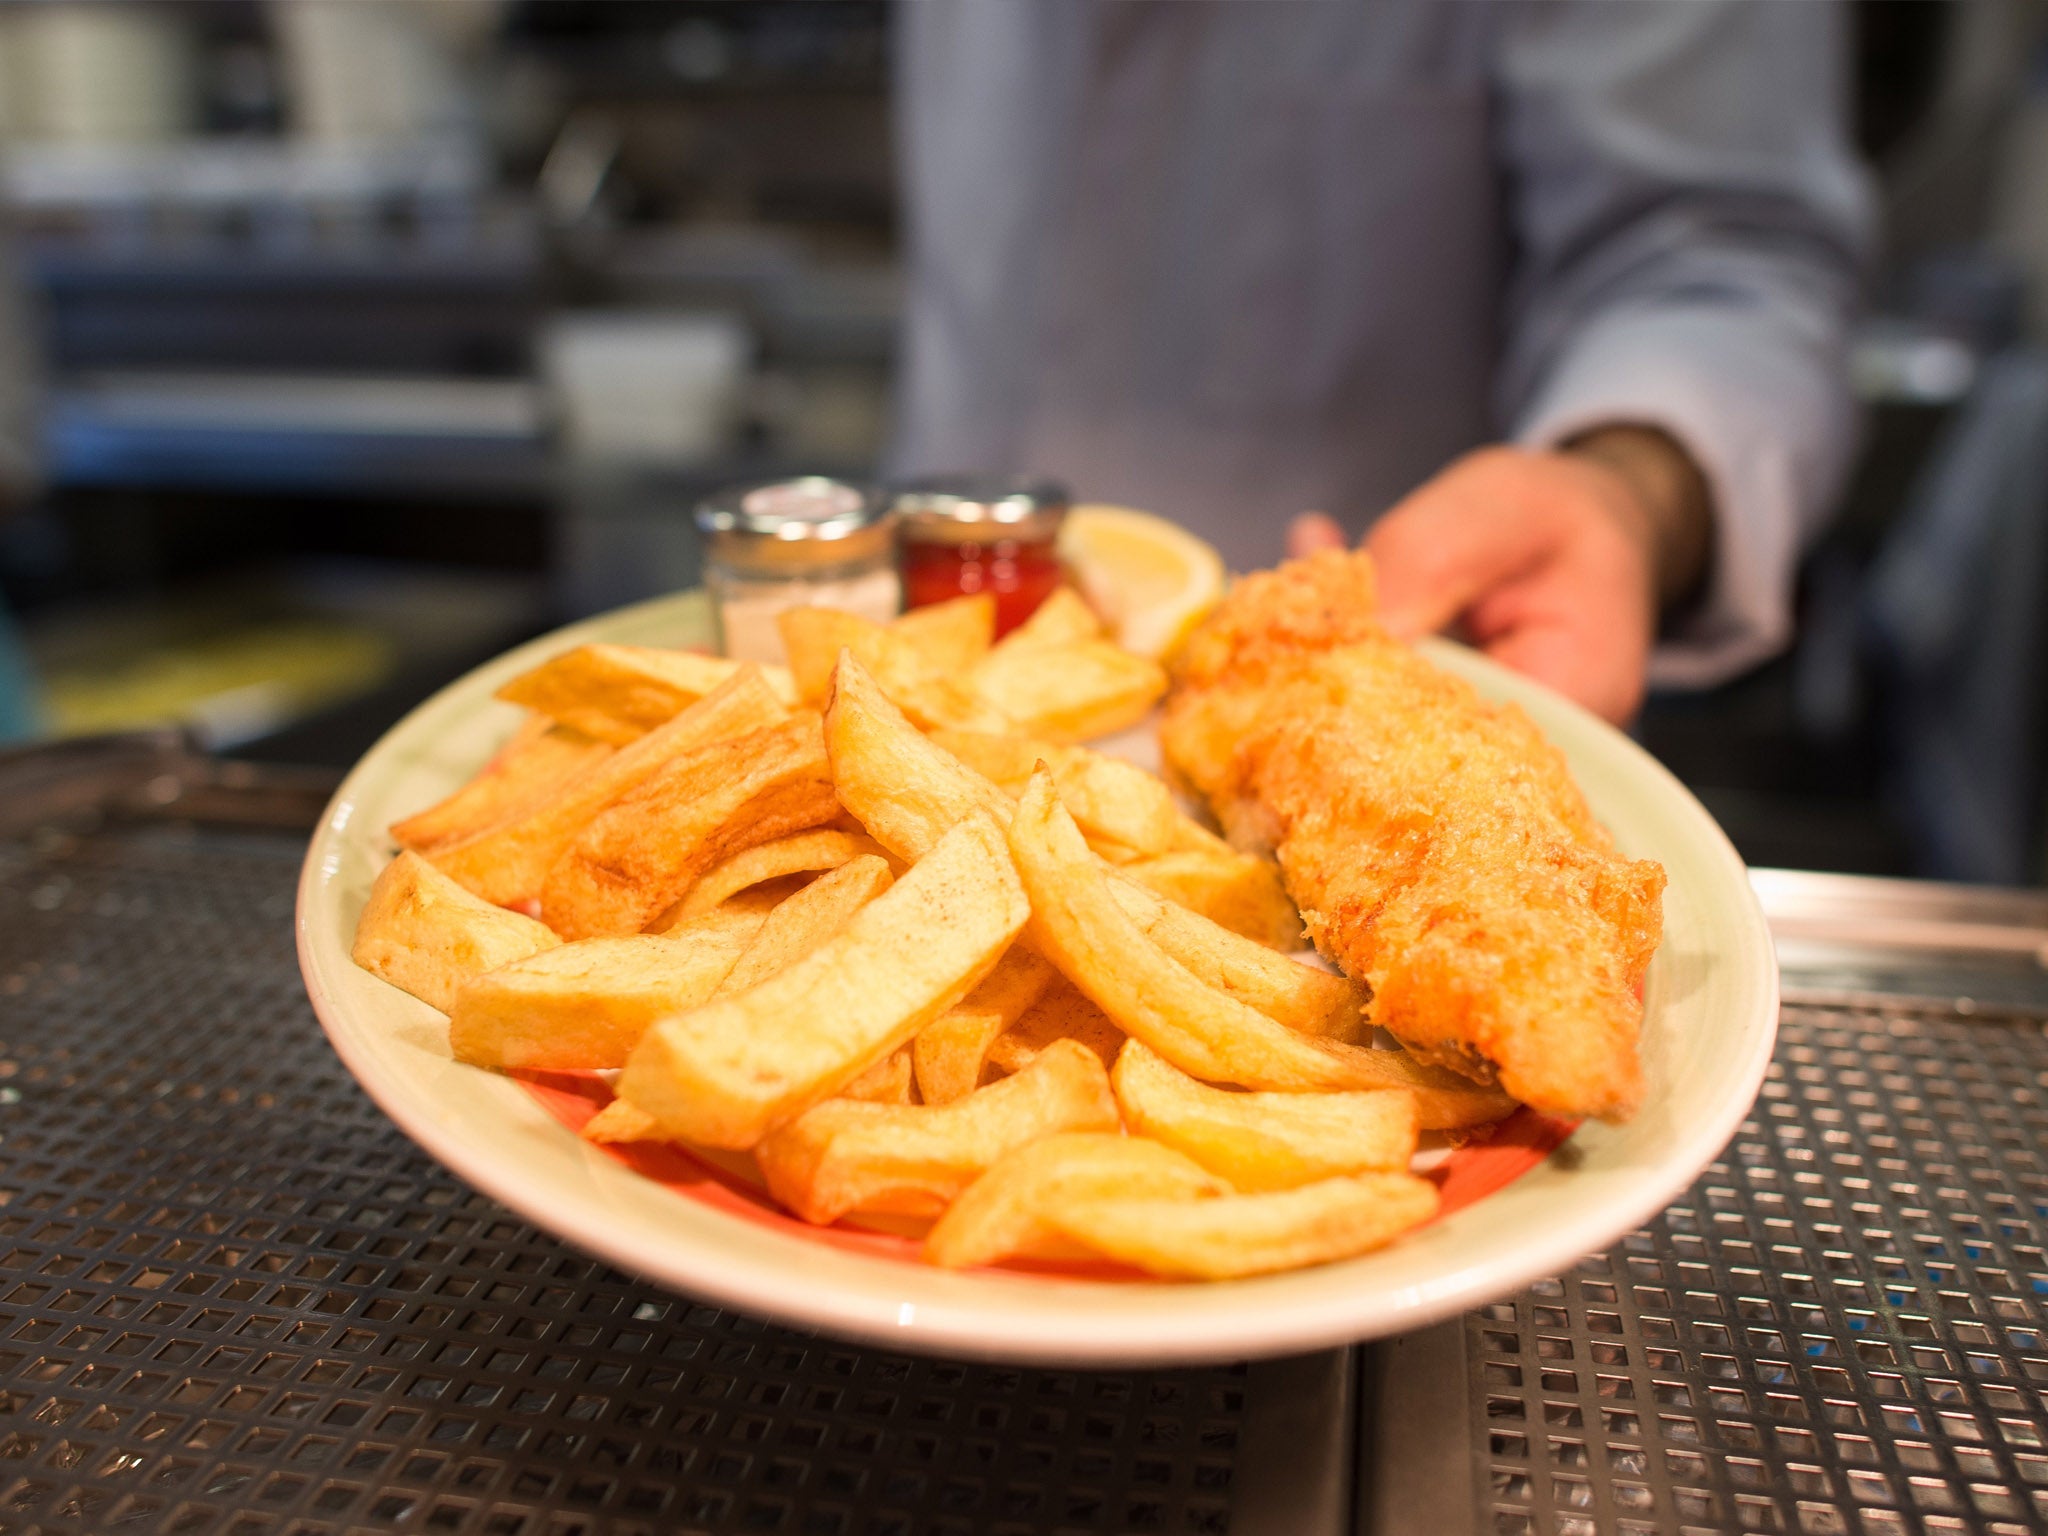 A chef poses with a plate of fish and chips at Poppies fish and chip restaurant in east London on 26 January 2015